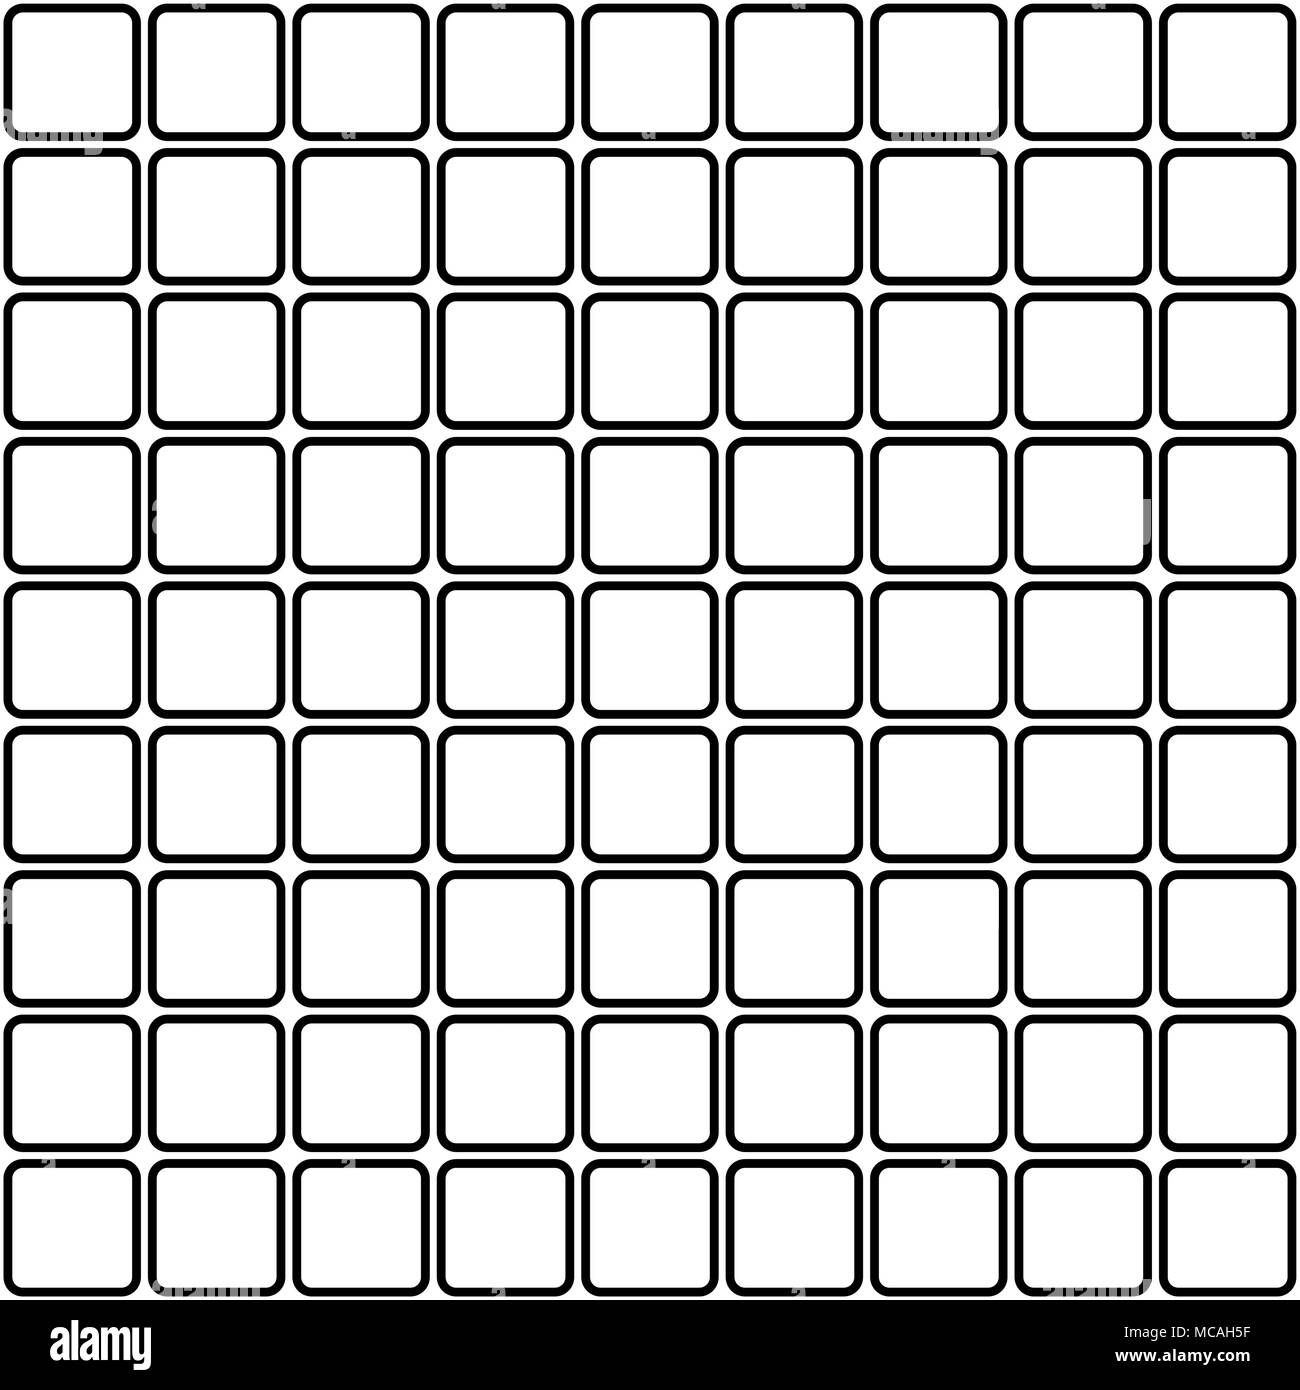 Seamless mosaic squares vector pattern or background. Stock Vector